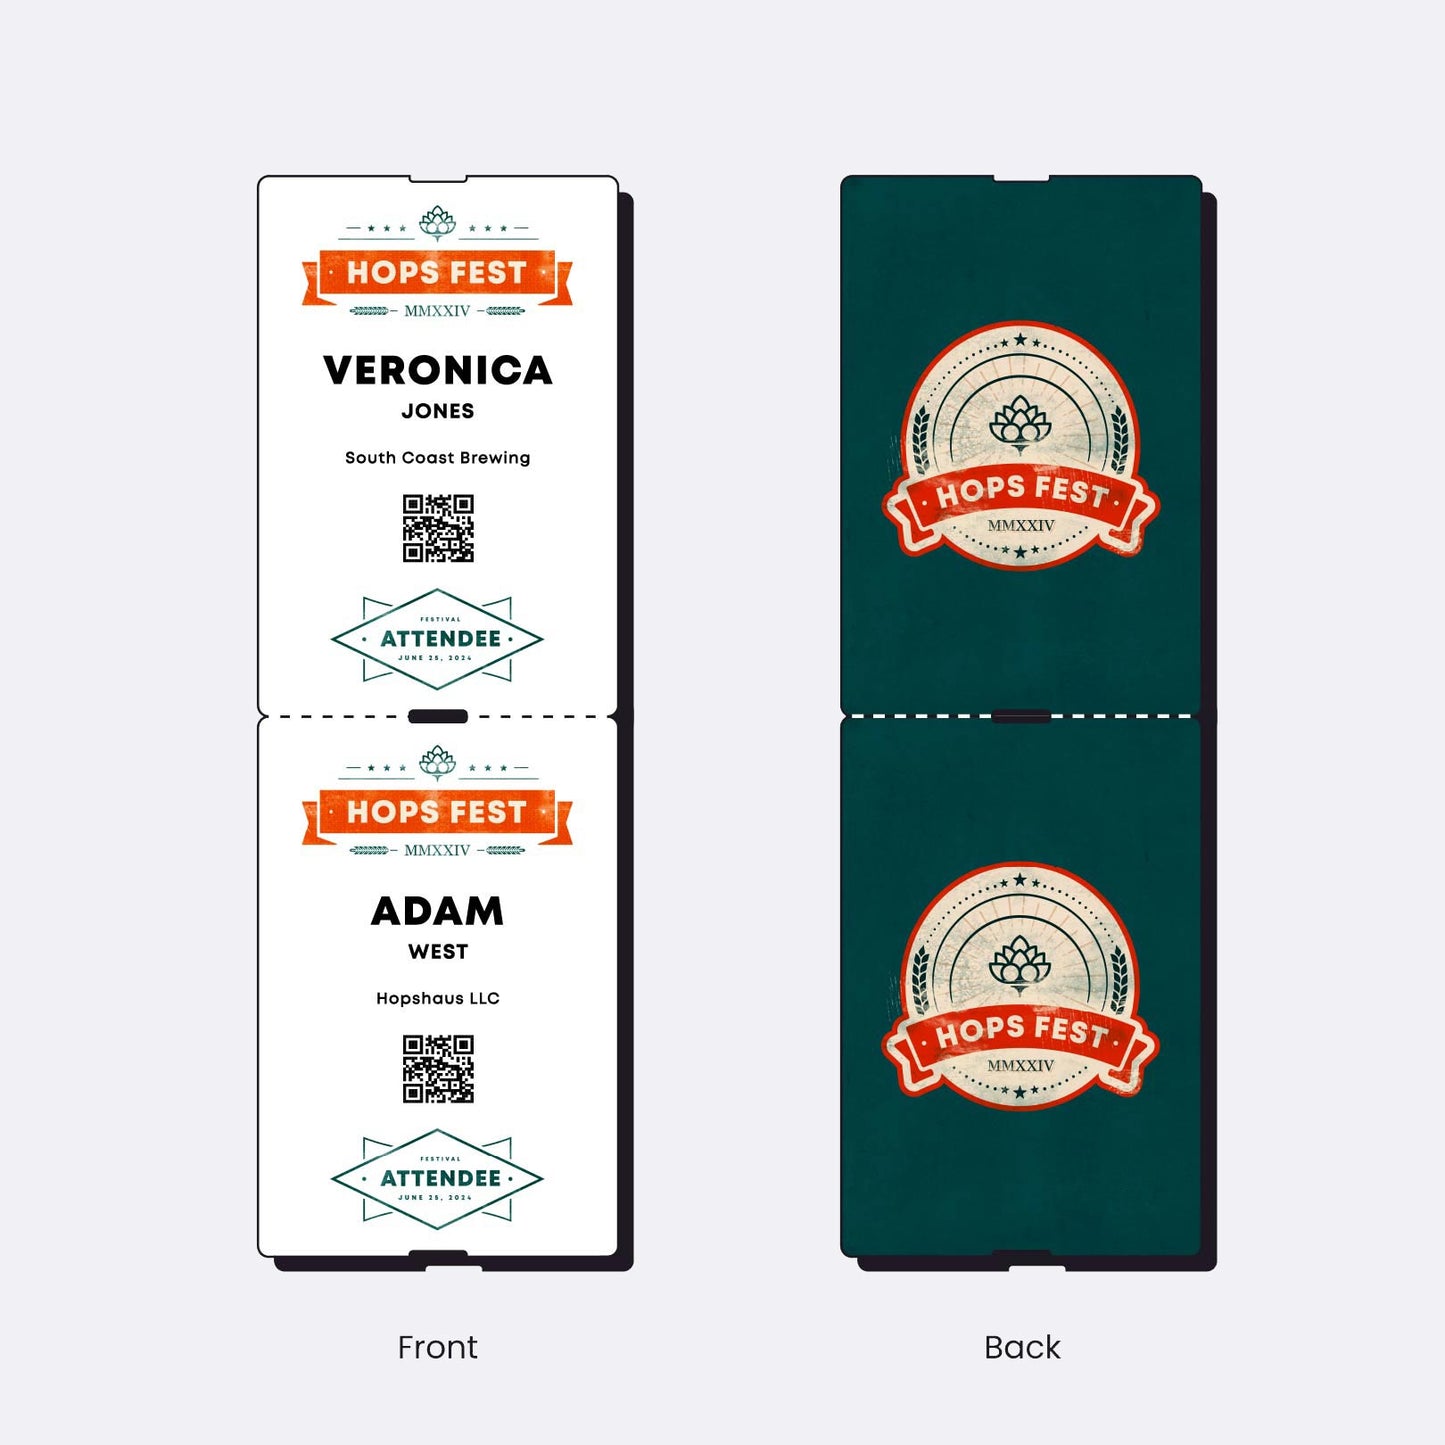 4” x 6” Paper Event Badge - Double Sided